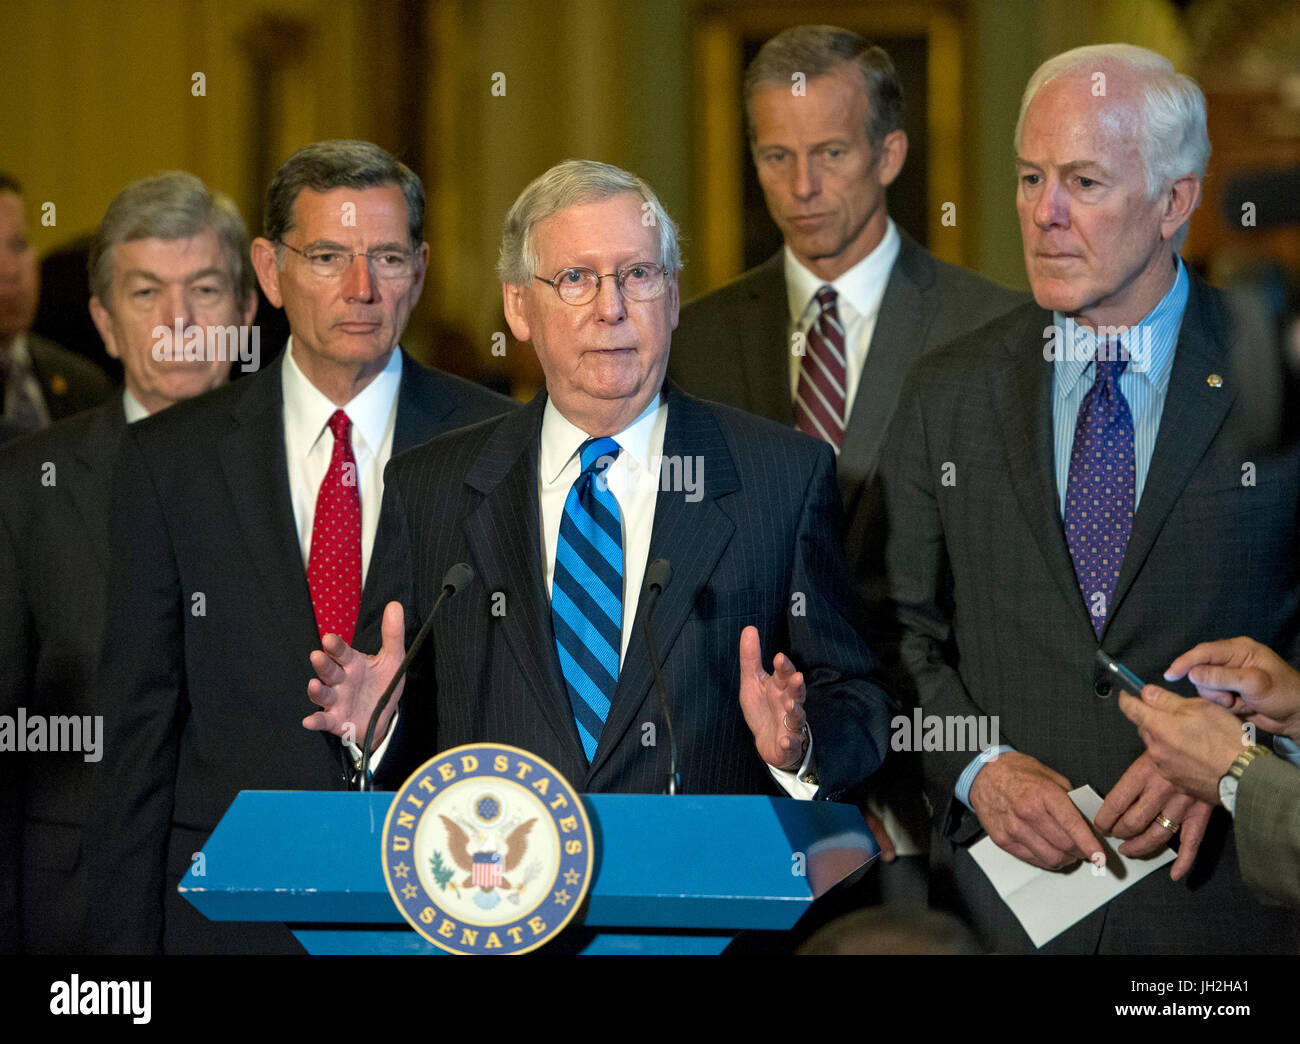 United States Senate Majority Leader Mitch McConnell (Republican of Kentucky), center, speaks to reporters following the Republican Party luncheon in the United States Capitol in Washington, DC on Tuesday, July 11, 2017. From left to right: US Senator Roy Blunt (Republican of Missouri), US Senator John Barrasso (Republican of Wyoming), Leader McConnell, US Senator John Thune (Republican of South Dakota) and US Senator John Cornyn (Republican of Texas). In his remarks, McConnell announced he will keep the Senate in session for the first two weeks of August, delaying their summer recess. Credi Stock Photo